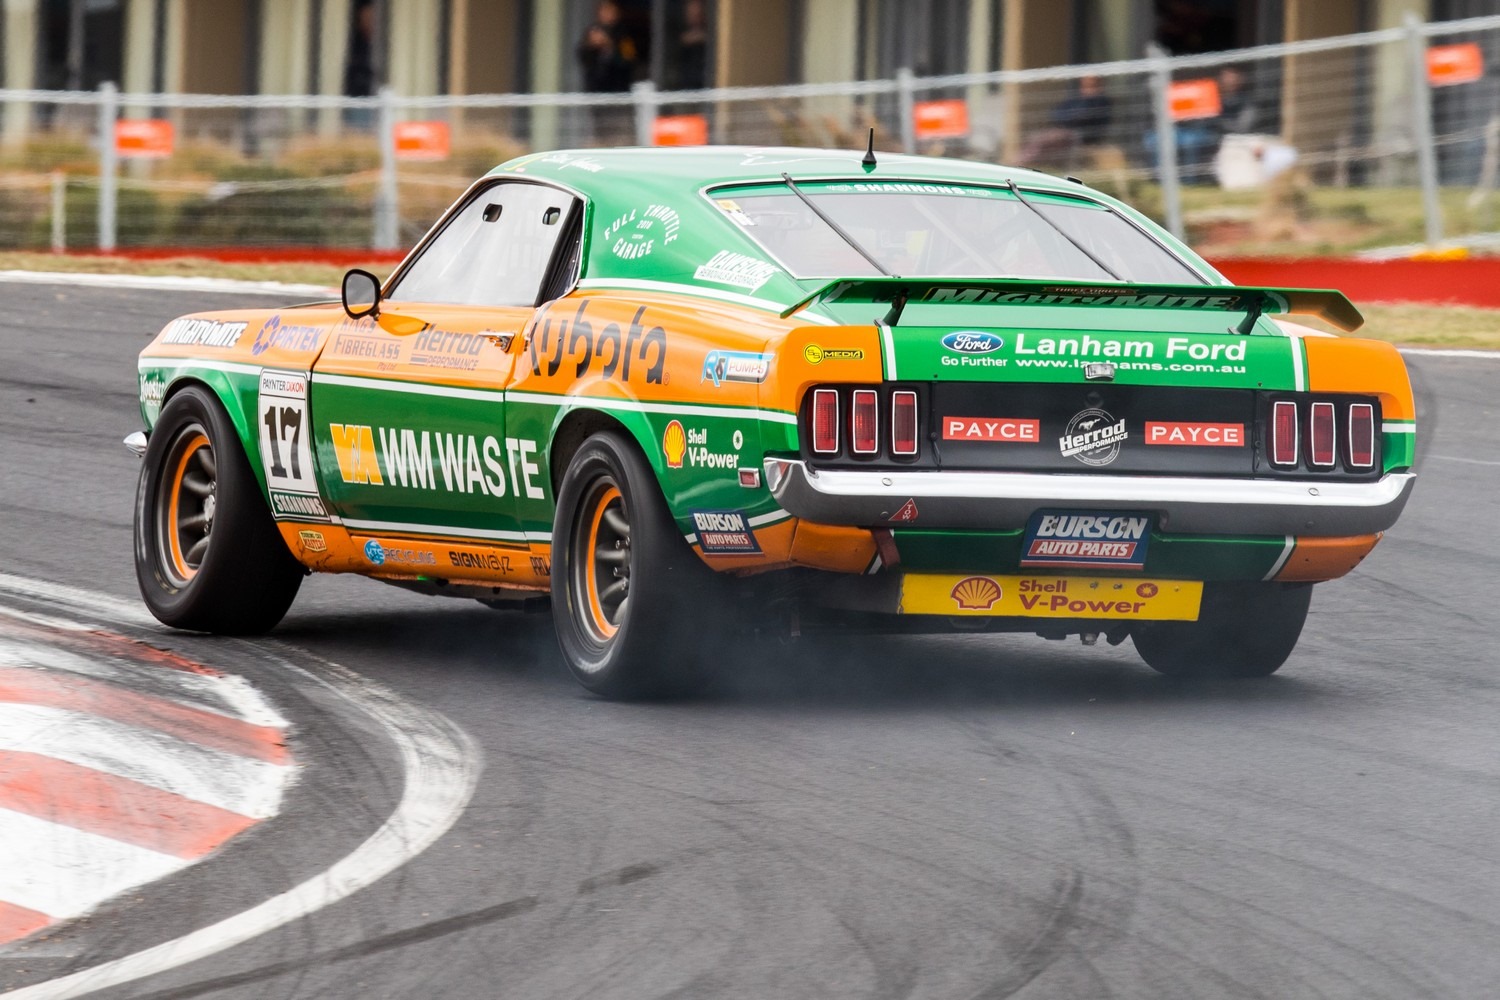 Gulf Western Oil Touring Car Masters